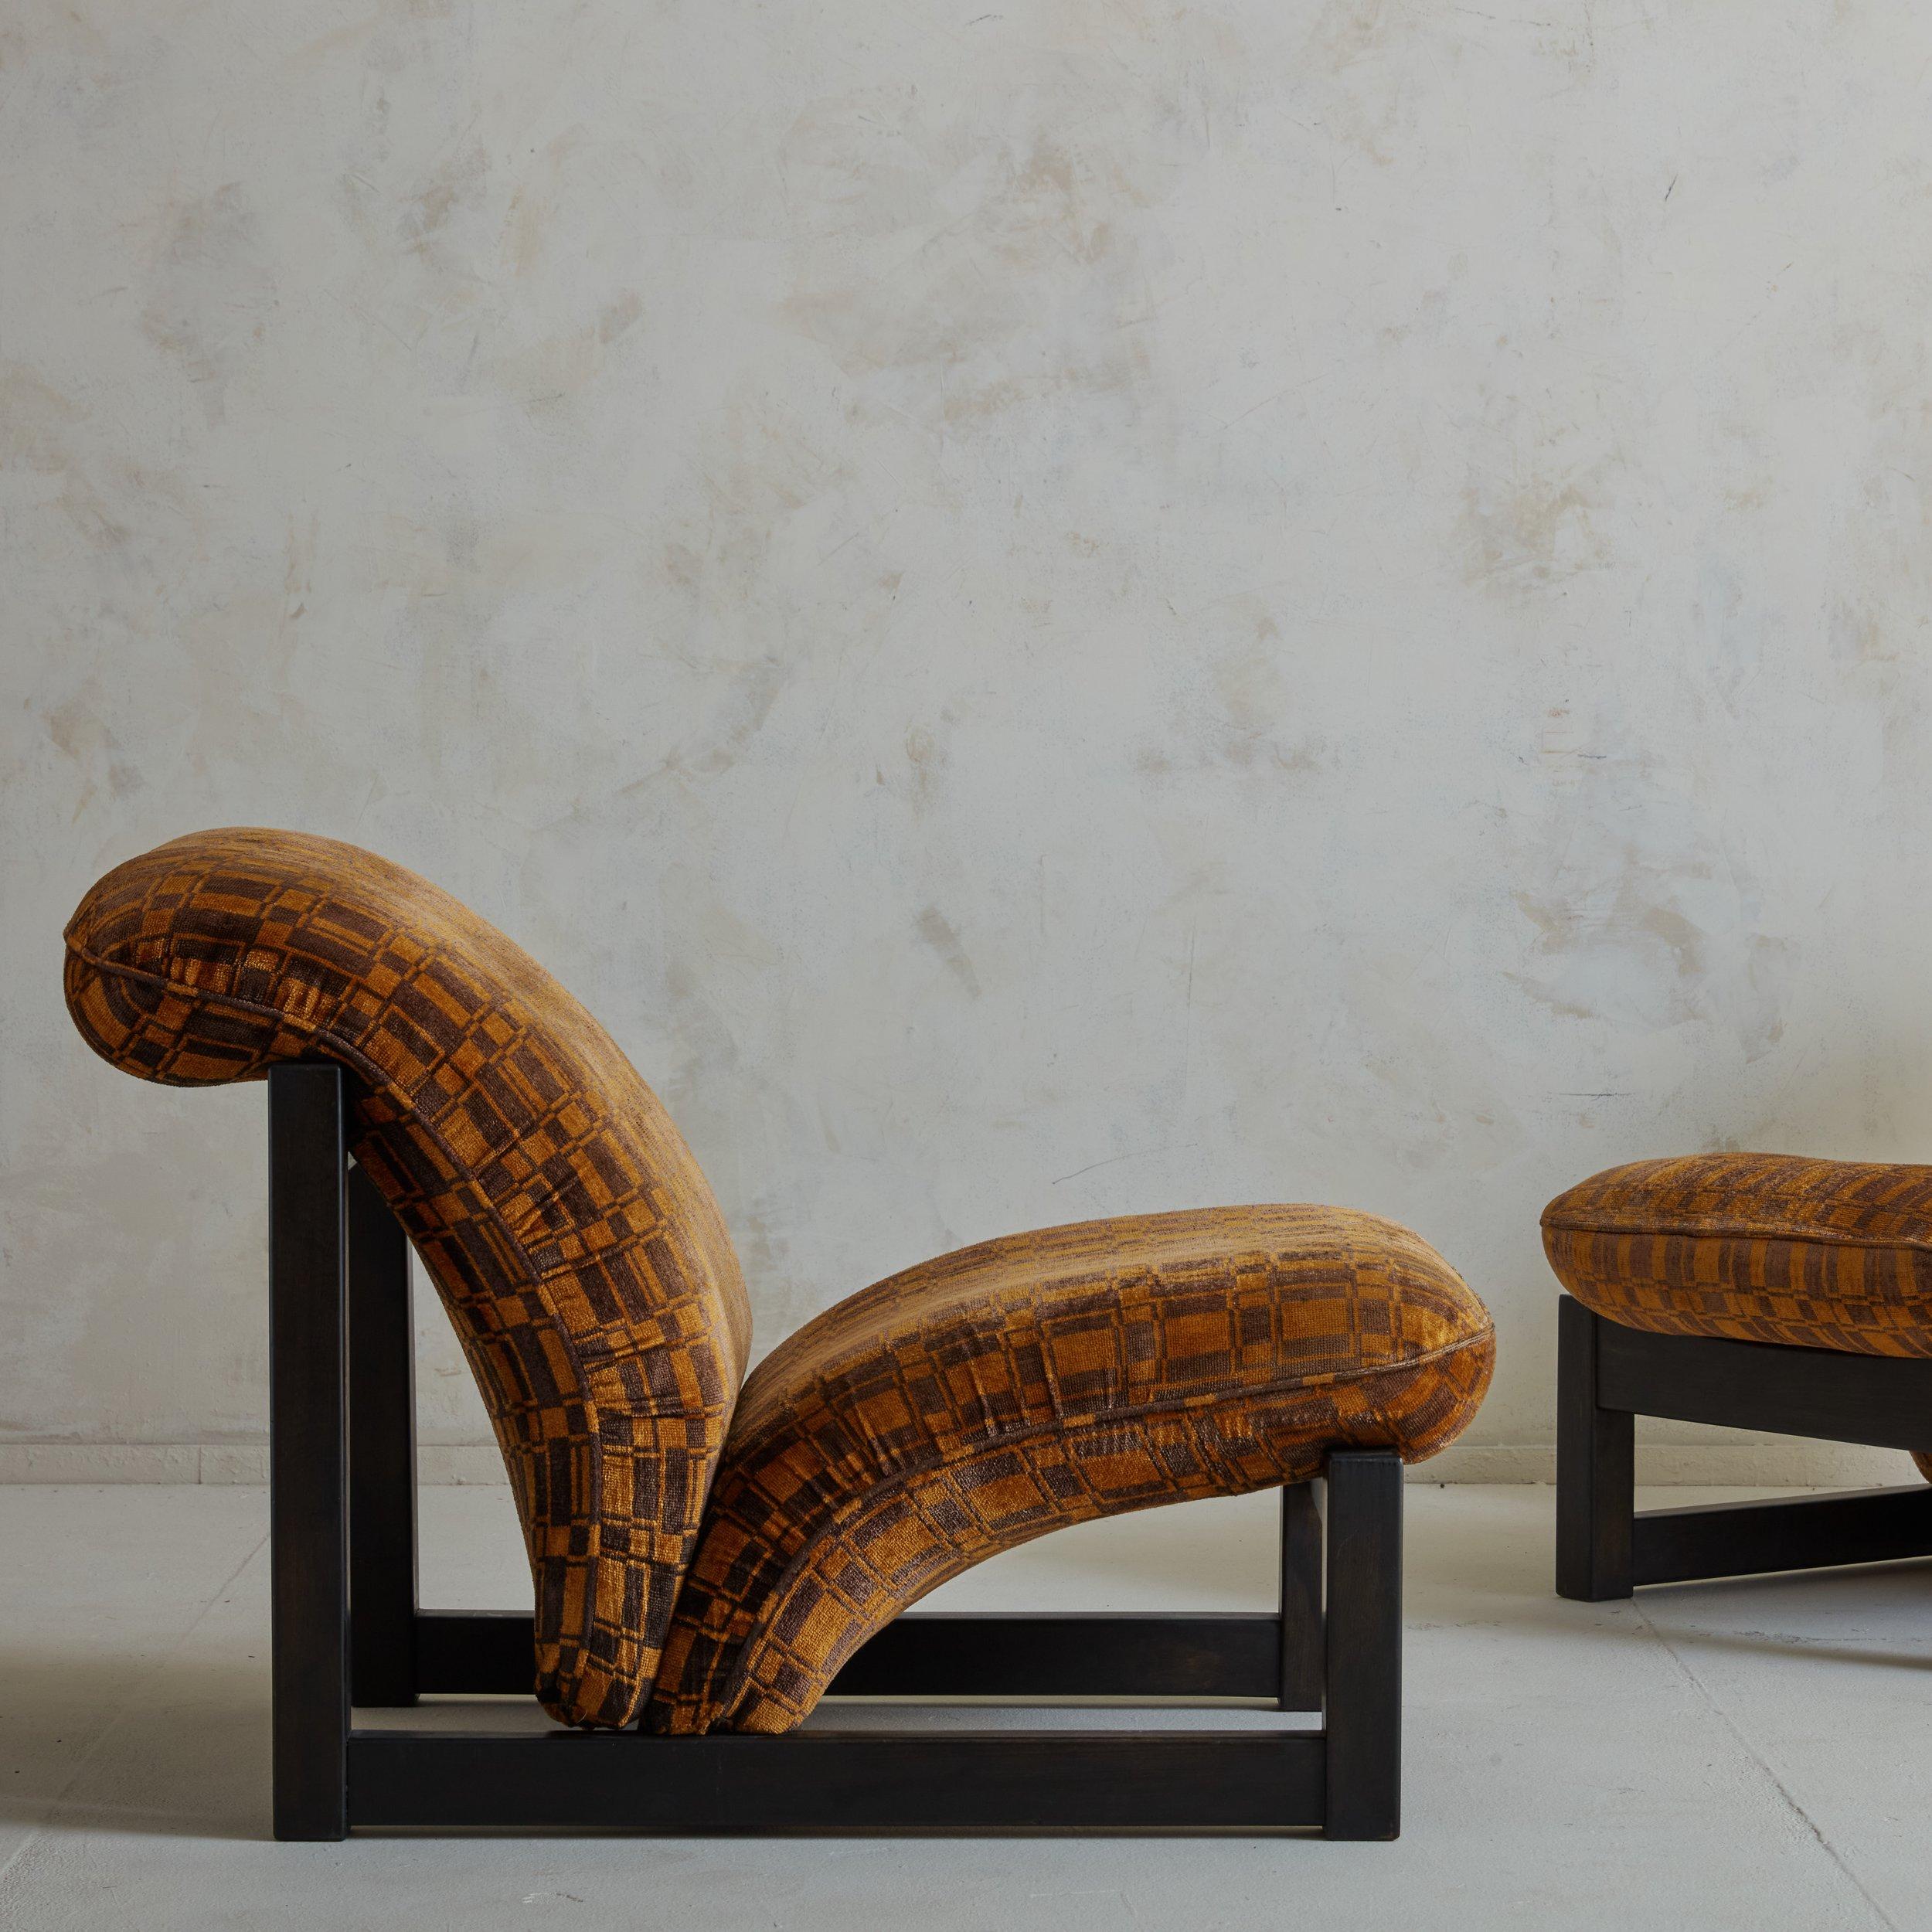 A striking pair of 1970s Italian lounge chairs featuring angular wood frames stained a rich chocolate brown hue. These chairs have dramatically curved seats and seat backs, which retain their original burnt orange and plum checkered velvet